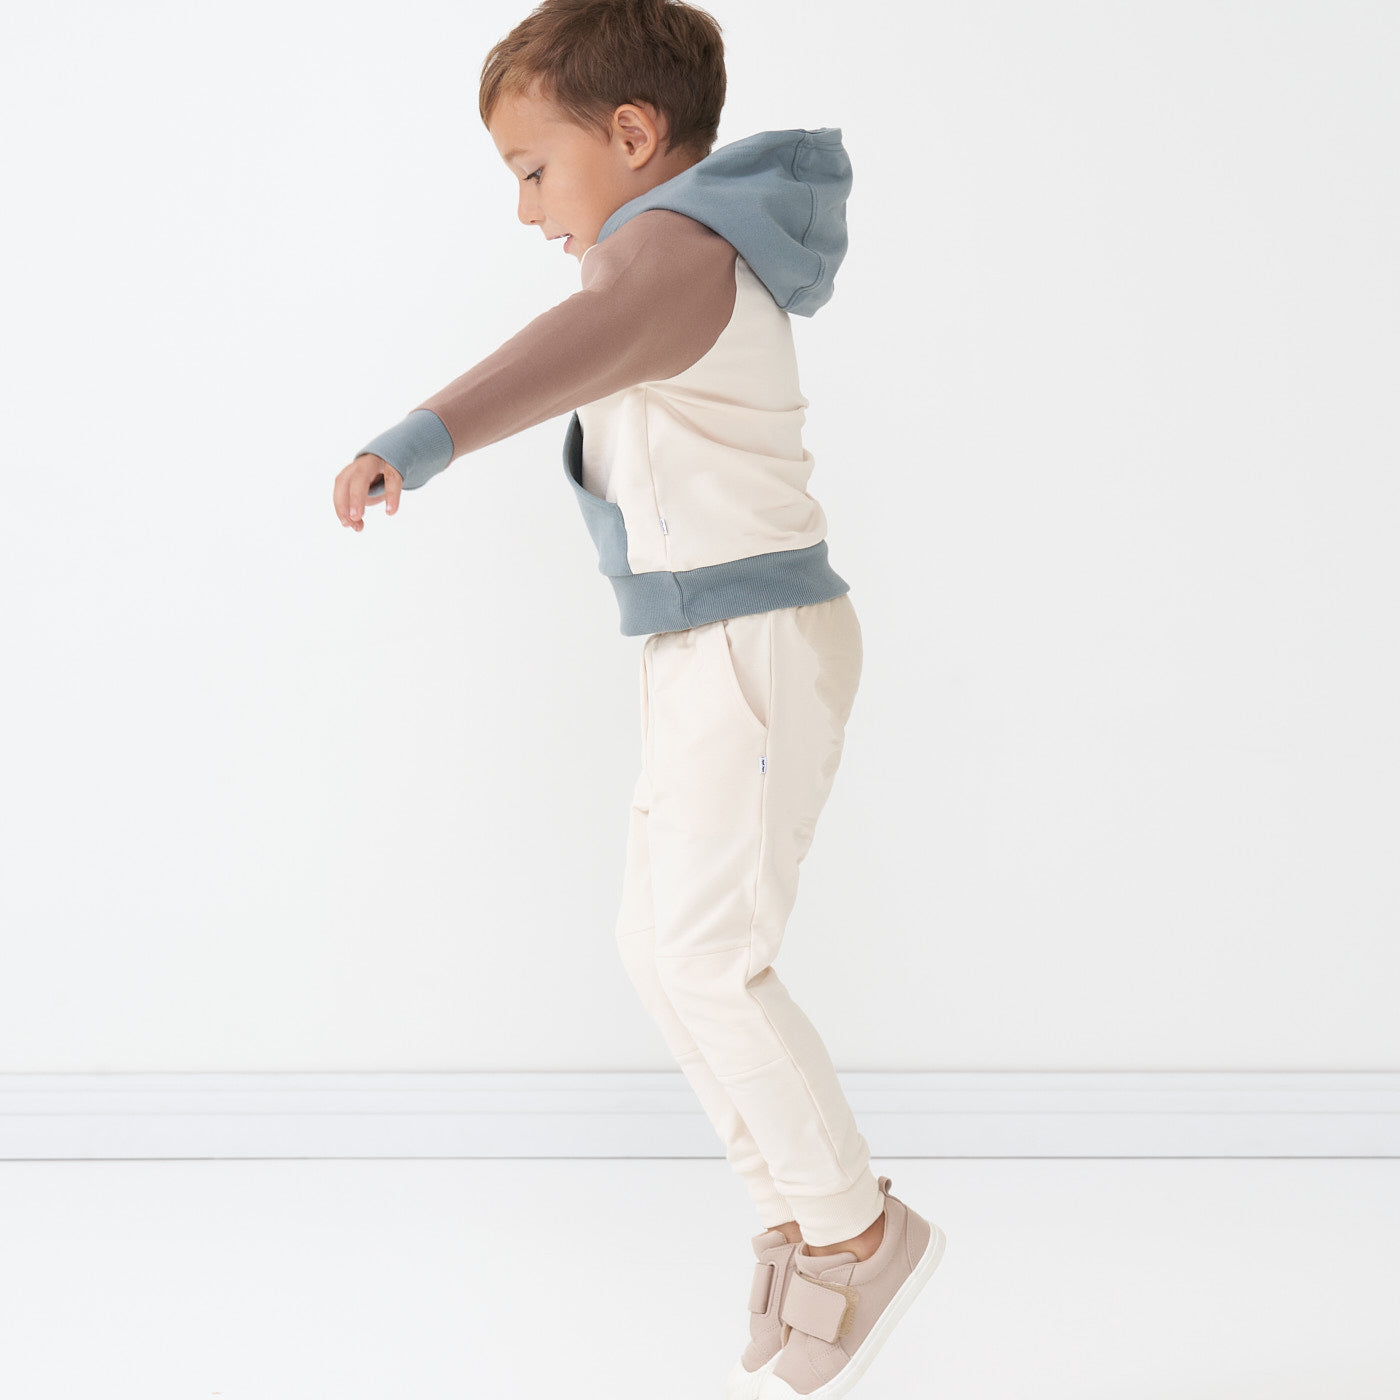 Child jumping wearing Cream joggers and coordinating Colorblock pullover hoodie